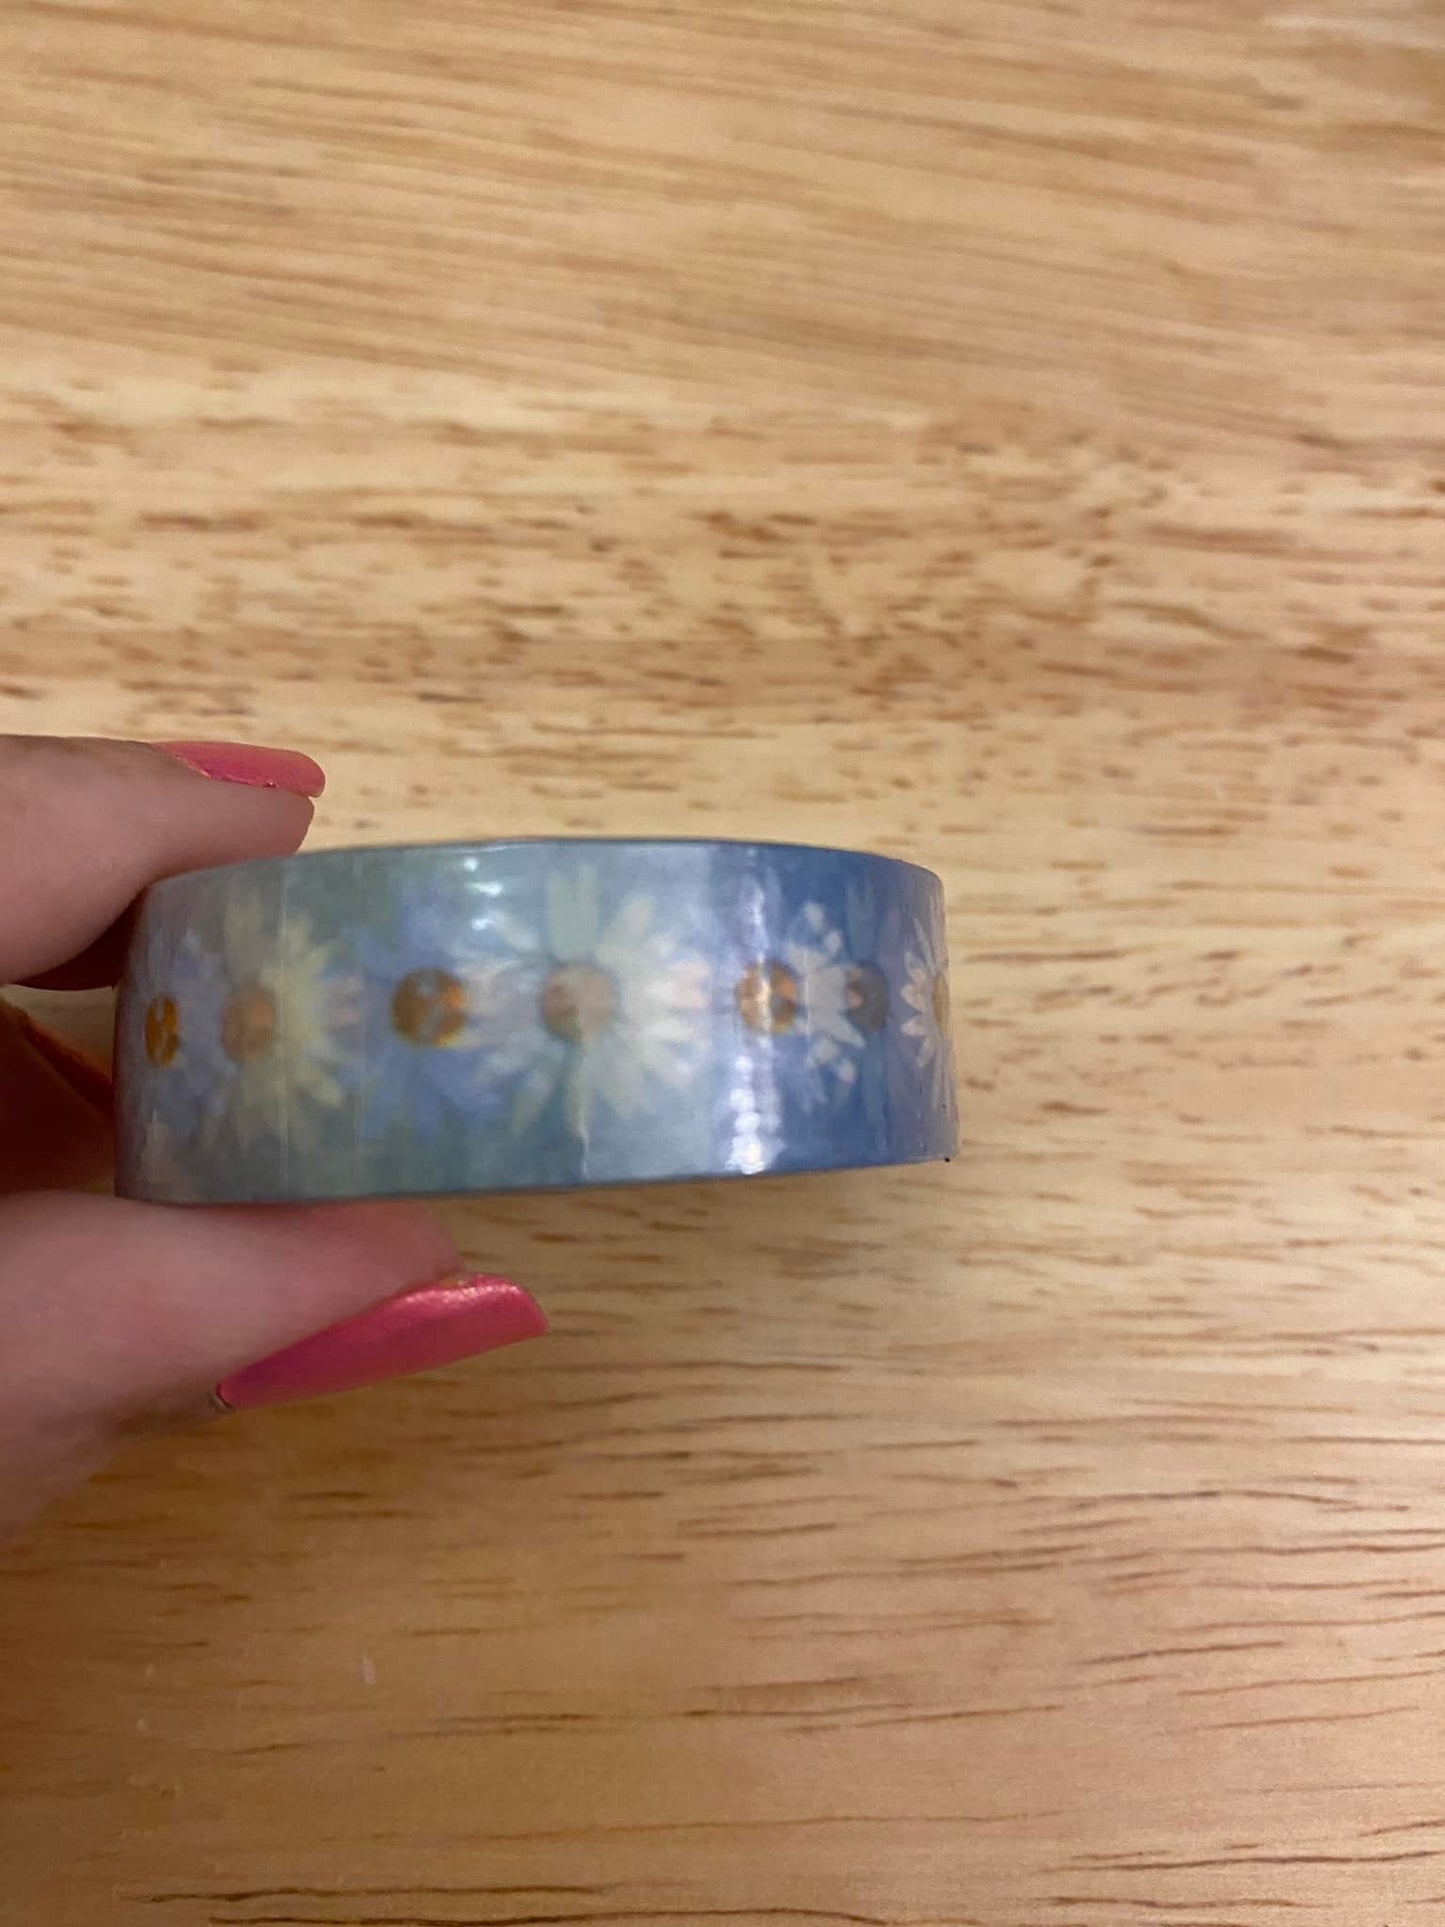 Big Roll of Ombre Dasiy Flowers Washi Tape